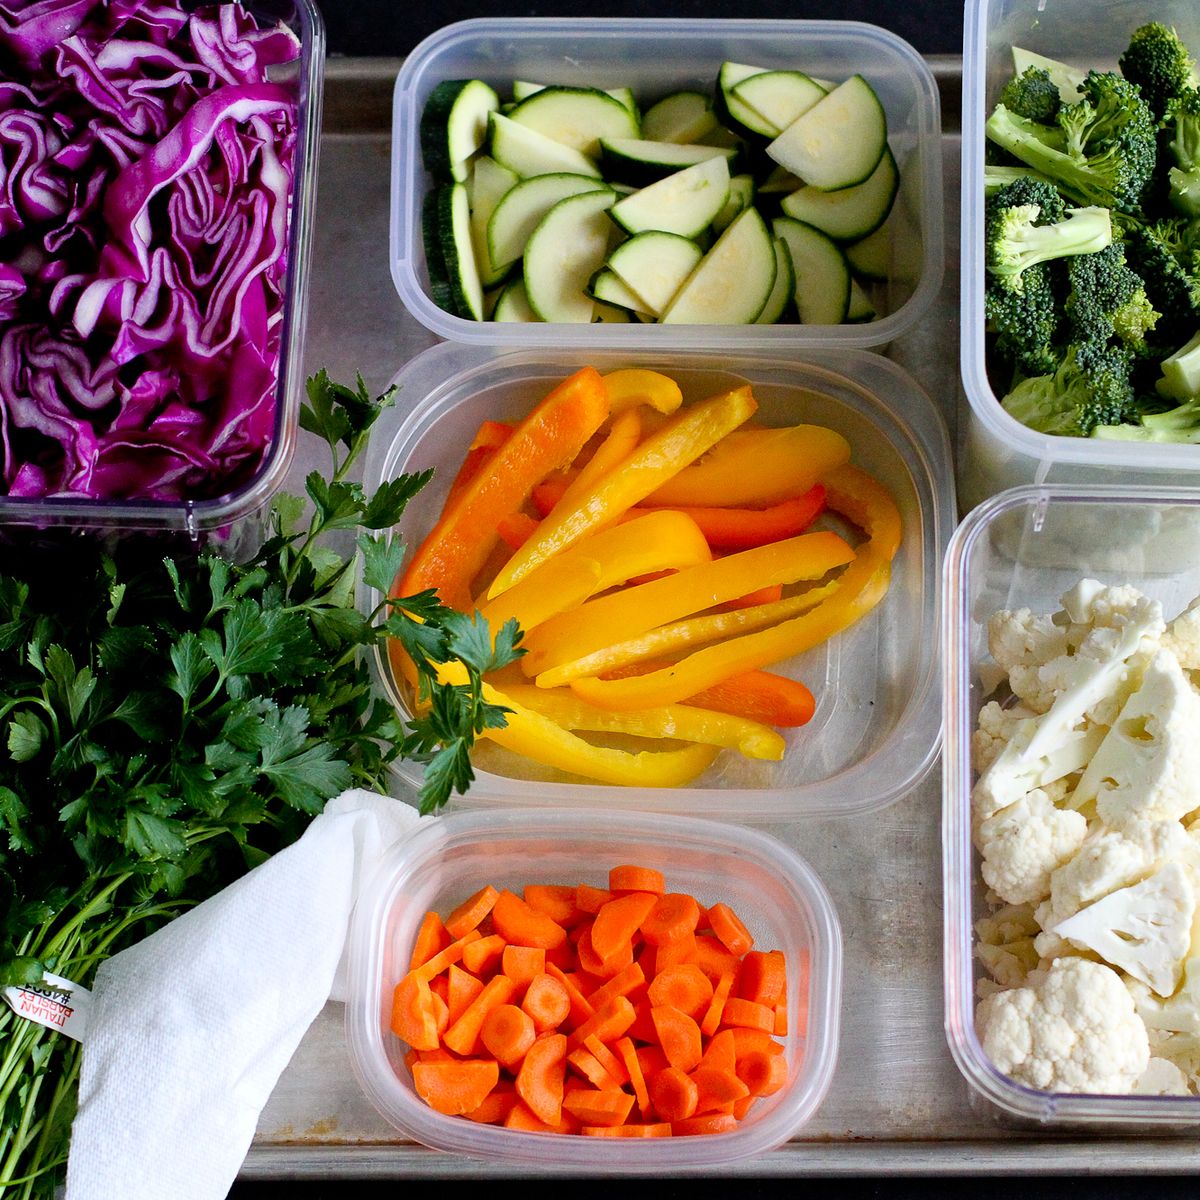 vegetablePreserving Freshness: How to Cut Vegetables and Freeze